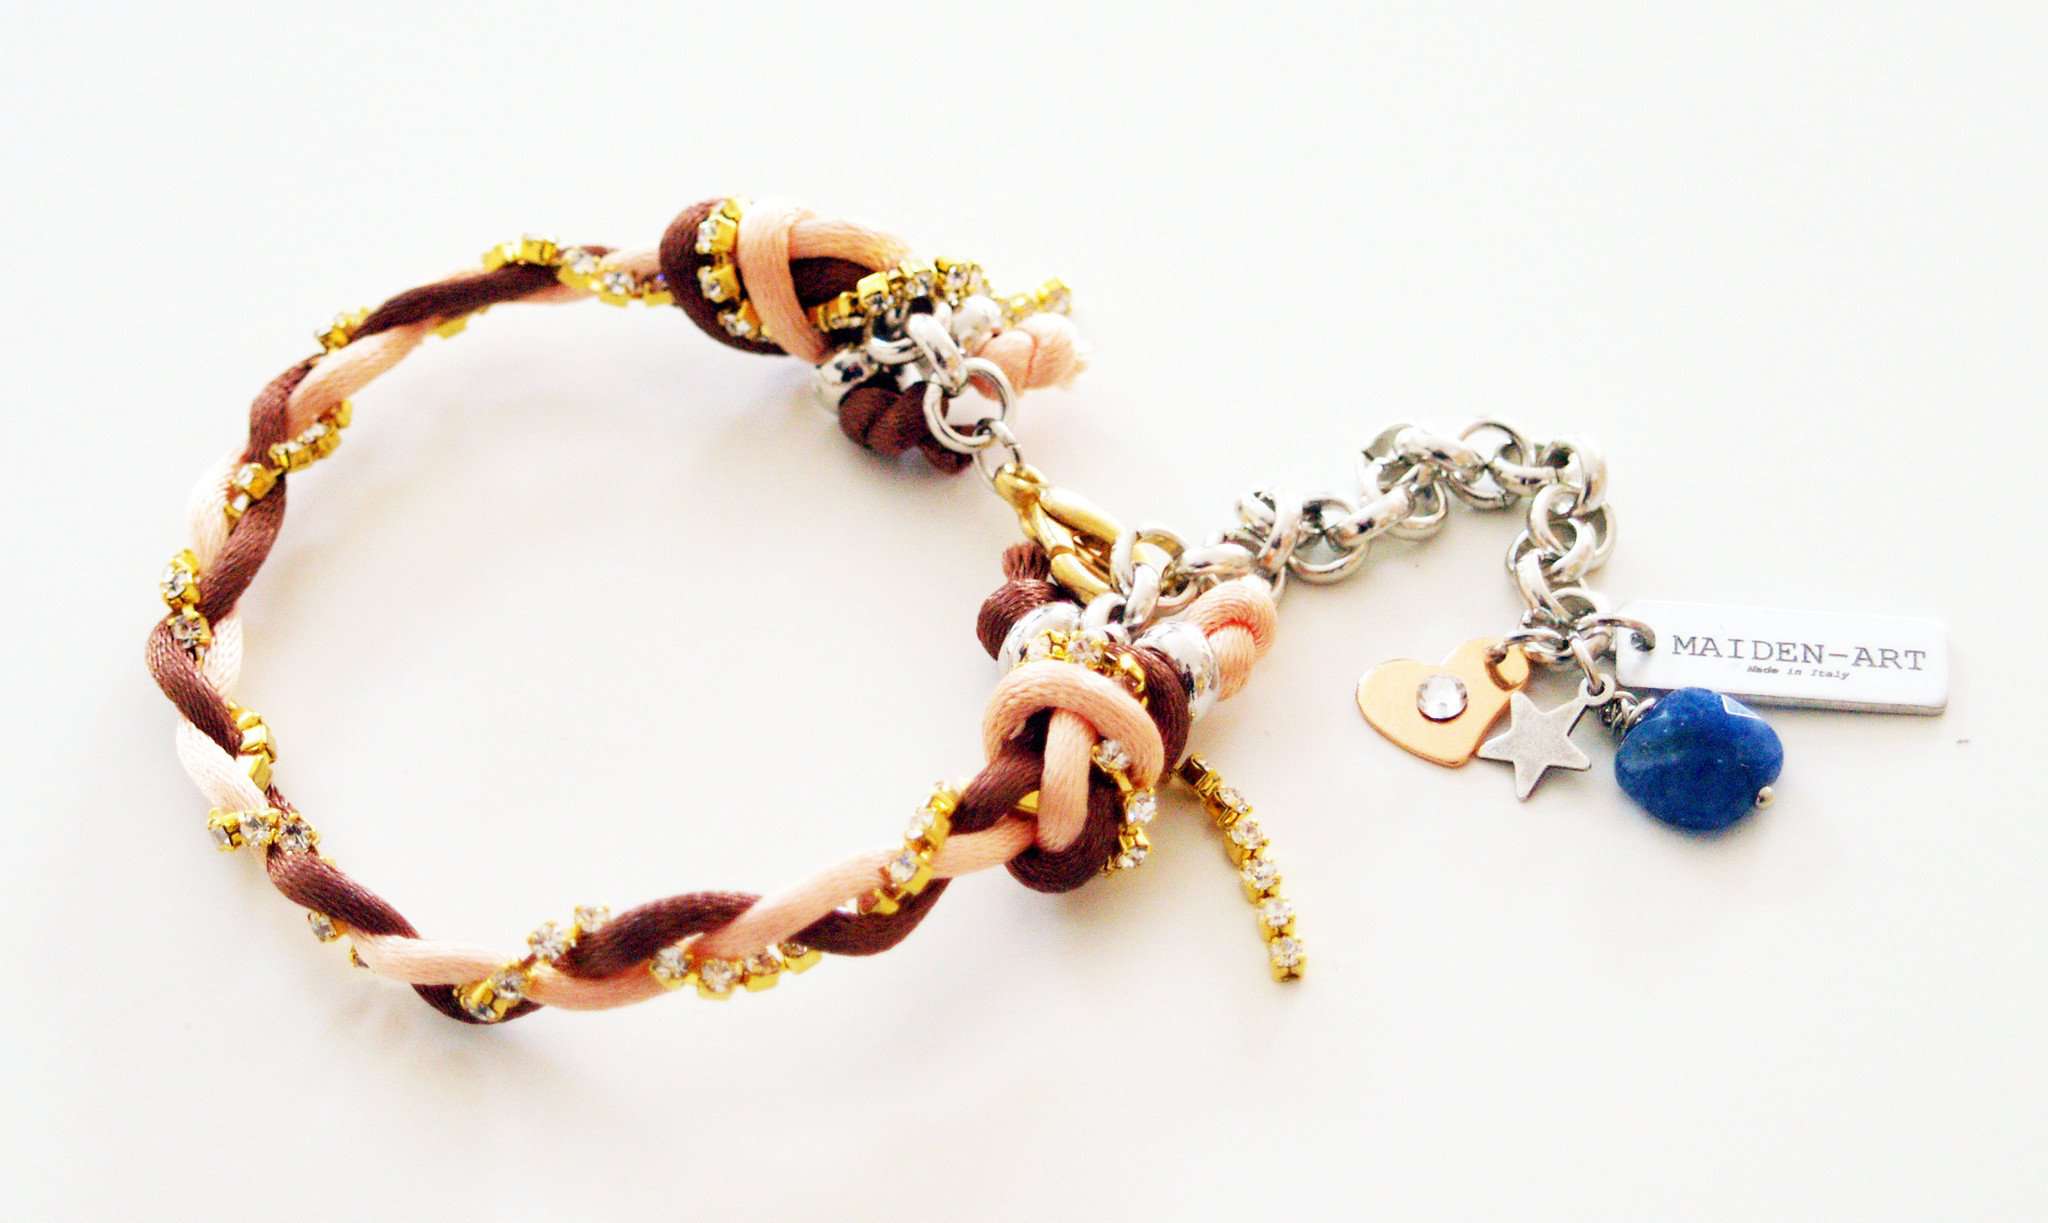 Charm Bracelet With Lapis Lazuli Stones, Crystals and Silk Cord.